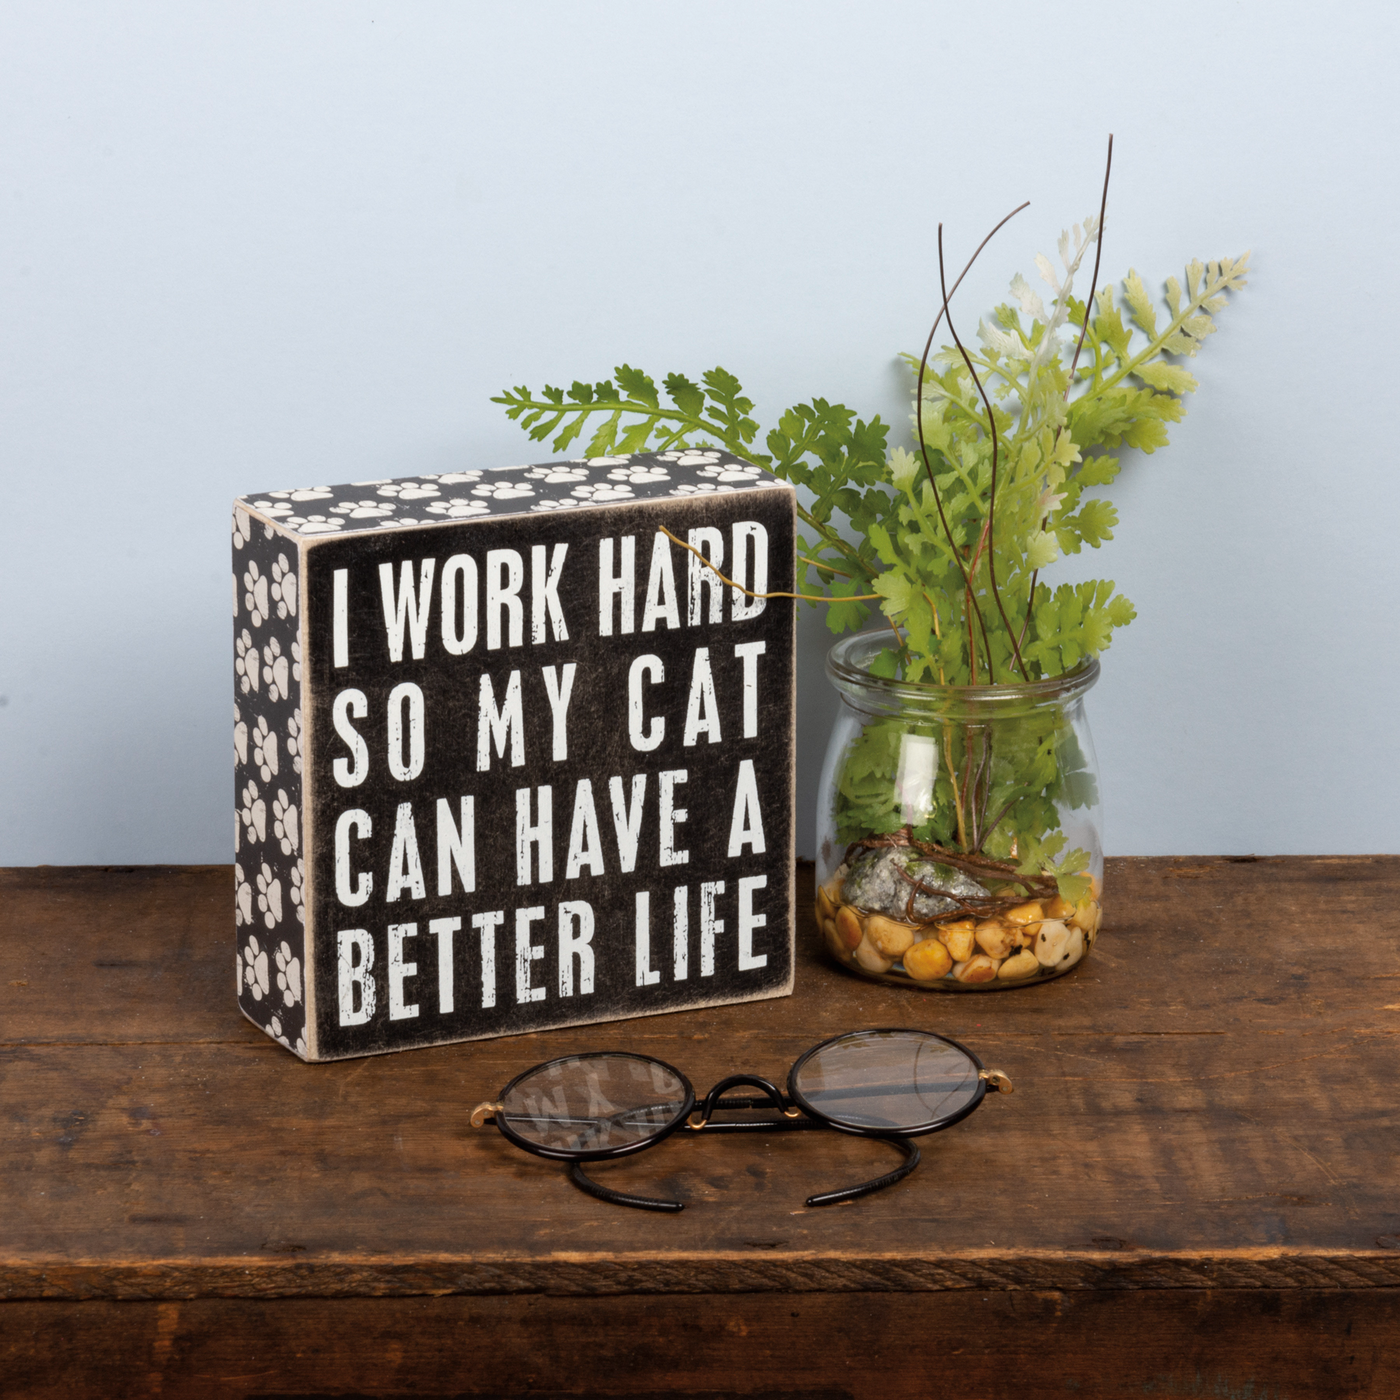 I Work Hard So My Cat Can Have A Better Life Box Sign